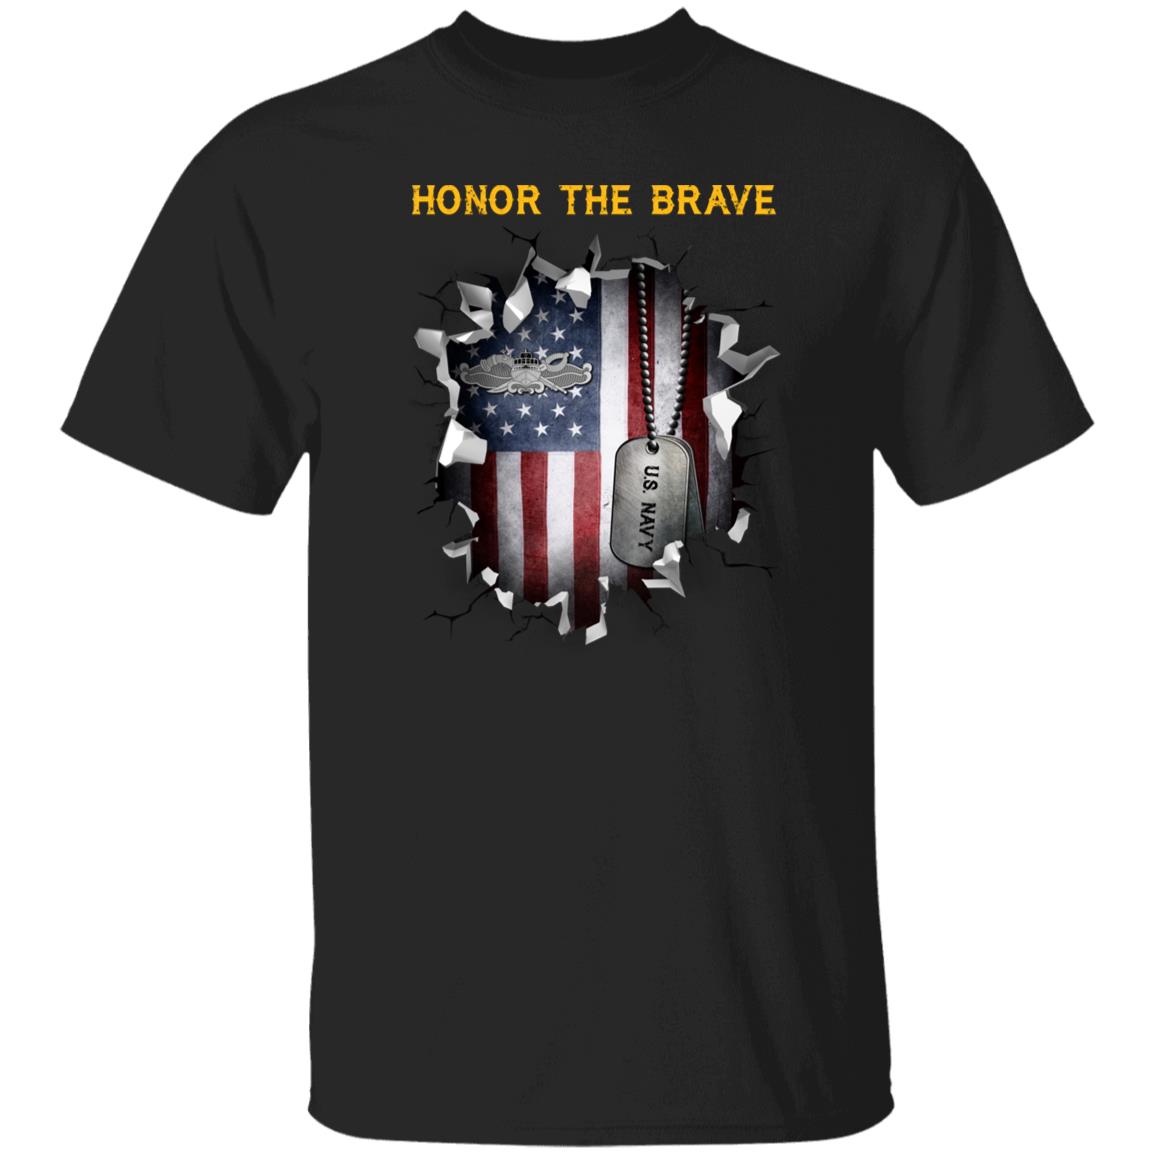 U.S. Navy special warfare combatant-craft crewmen (SWCC) - Honor The Brave Front Shirt